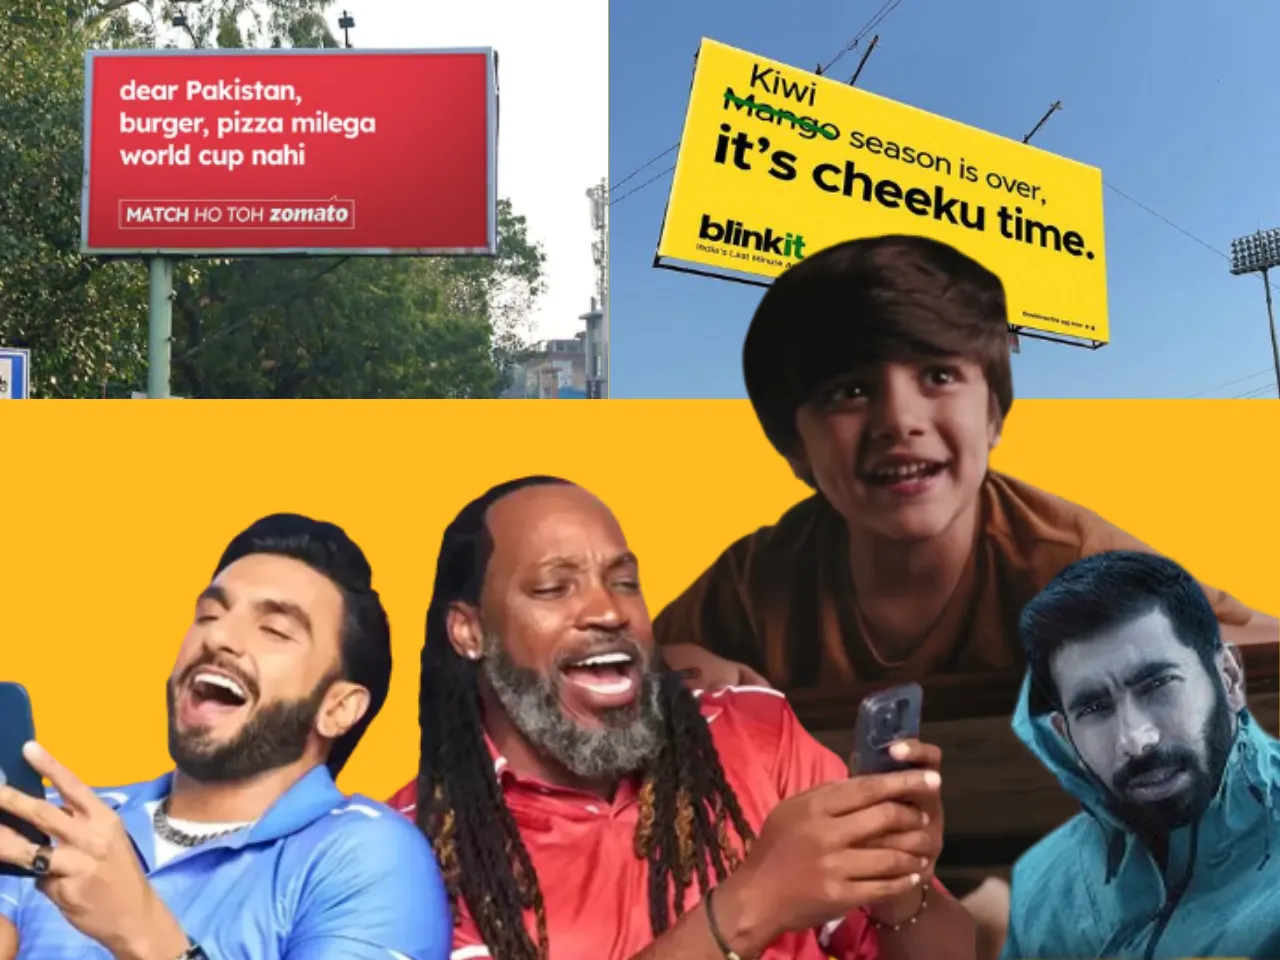 Qcom delivers all-rounder marketing techniques this World Cup season